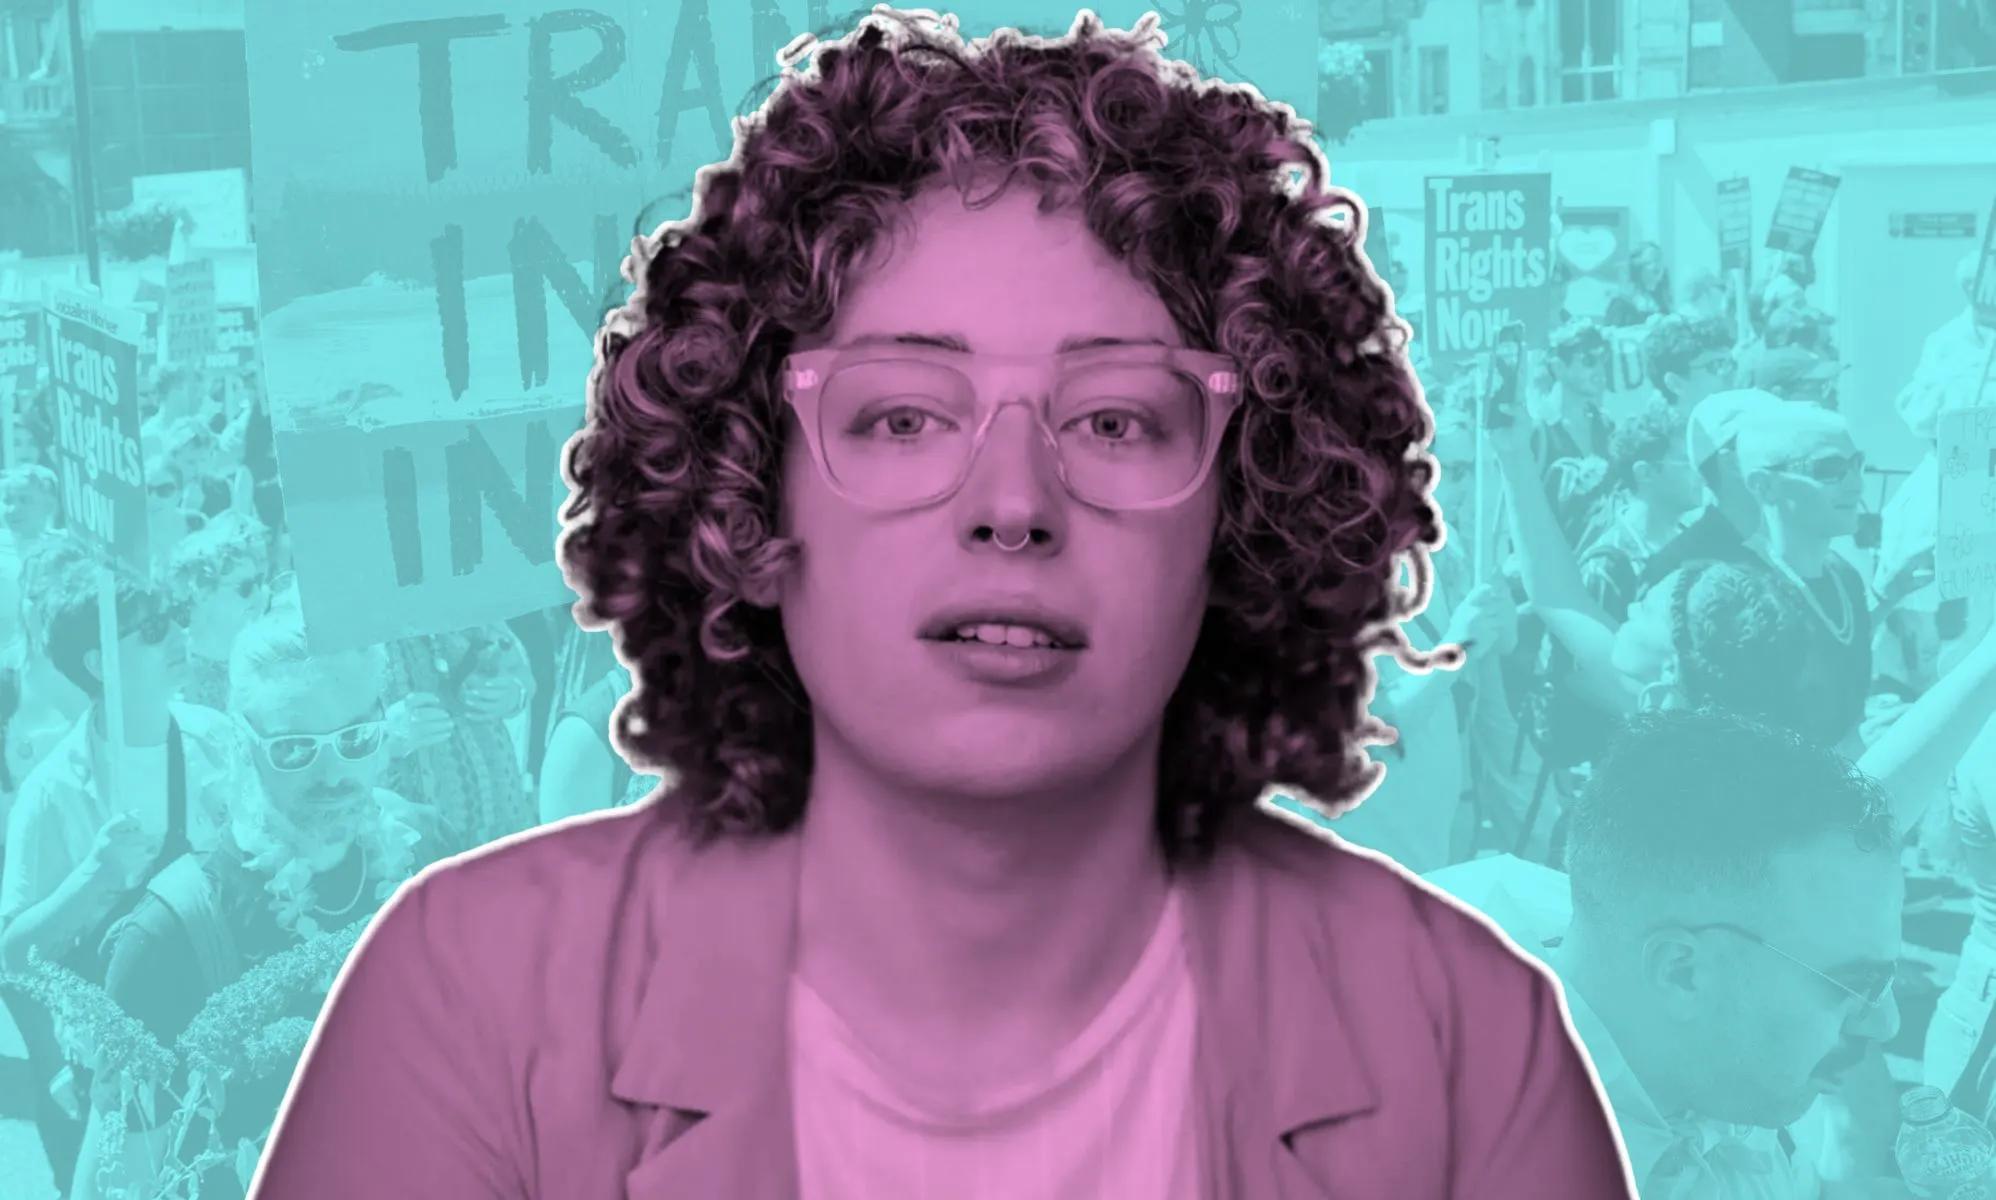 Trans+ History Week founder says ‘we’ve always been here’ [Video]